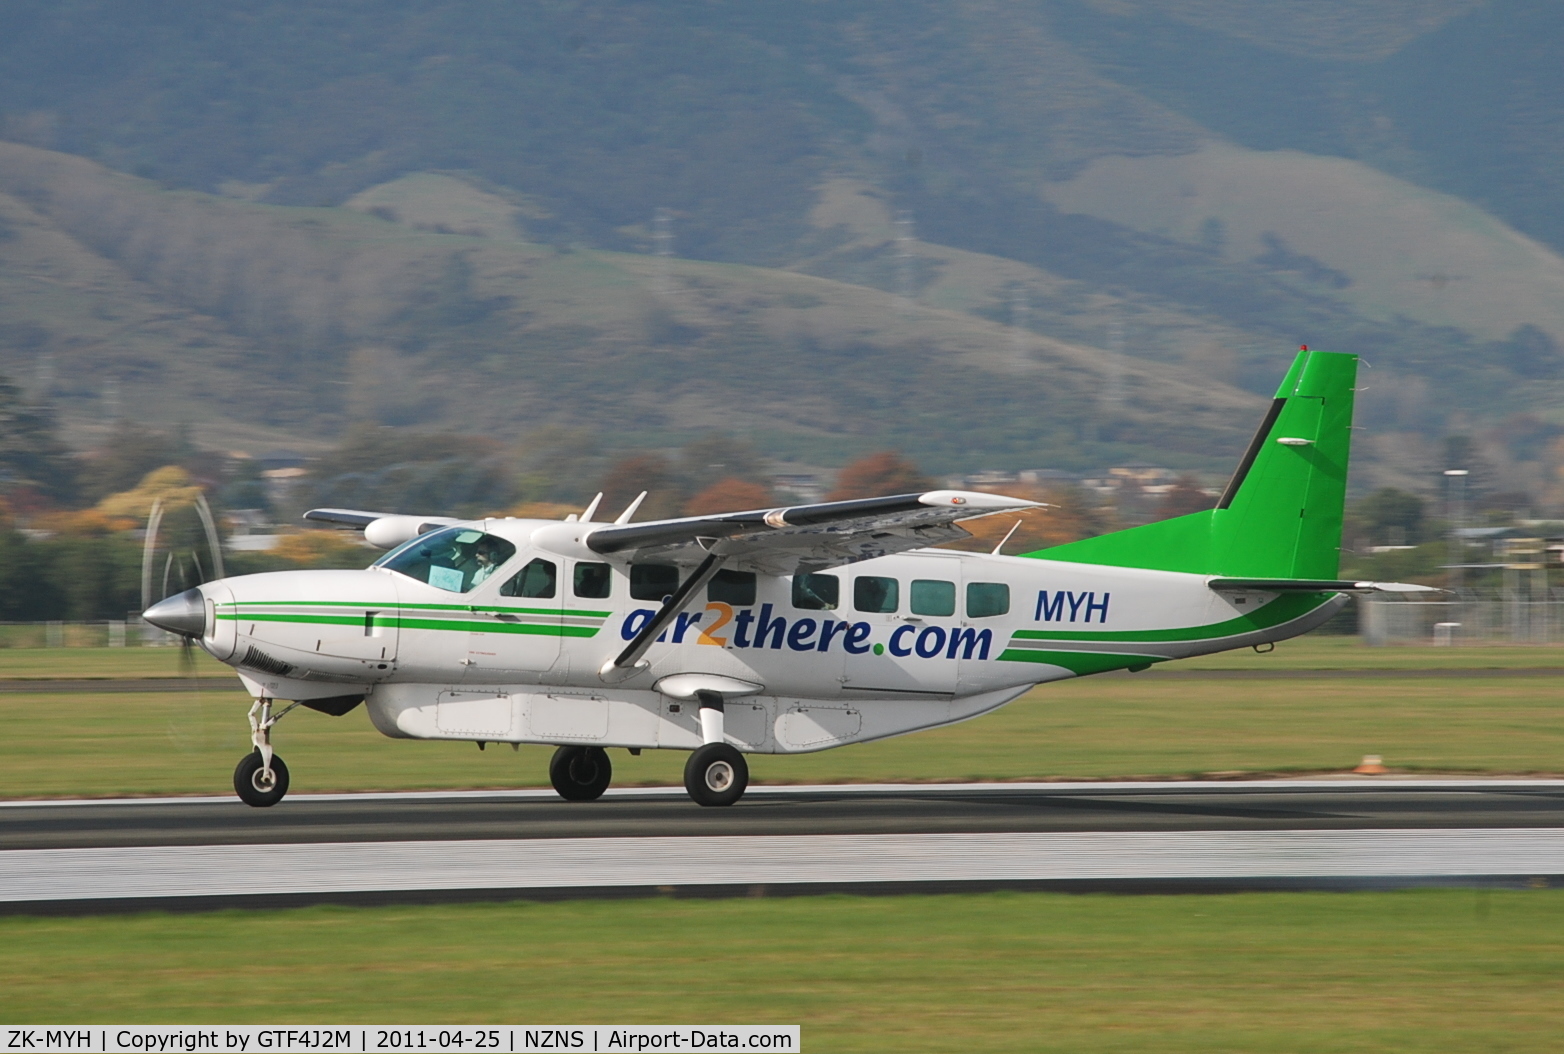 ZK-MYH, 1997 Cessna 208B Grand Caravan C/N 208B0604, ZK-MYH  Air 2 There  Nelson 25.4.11